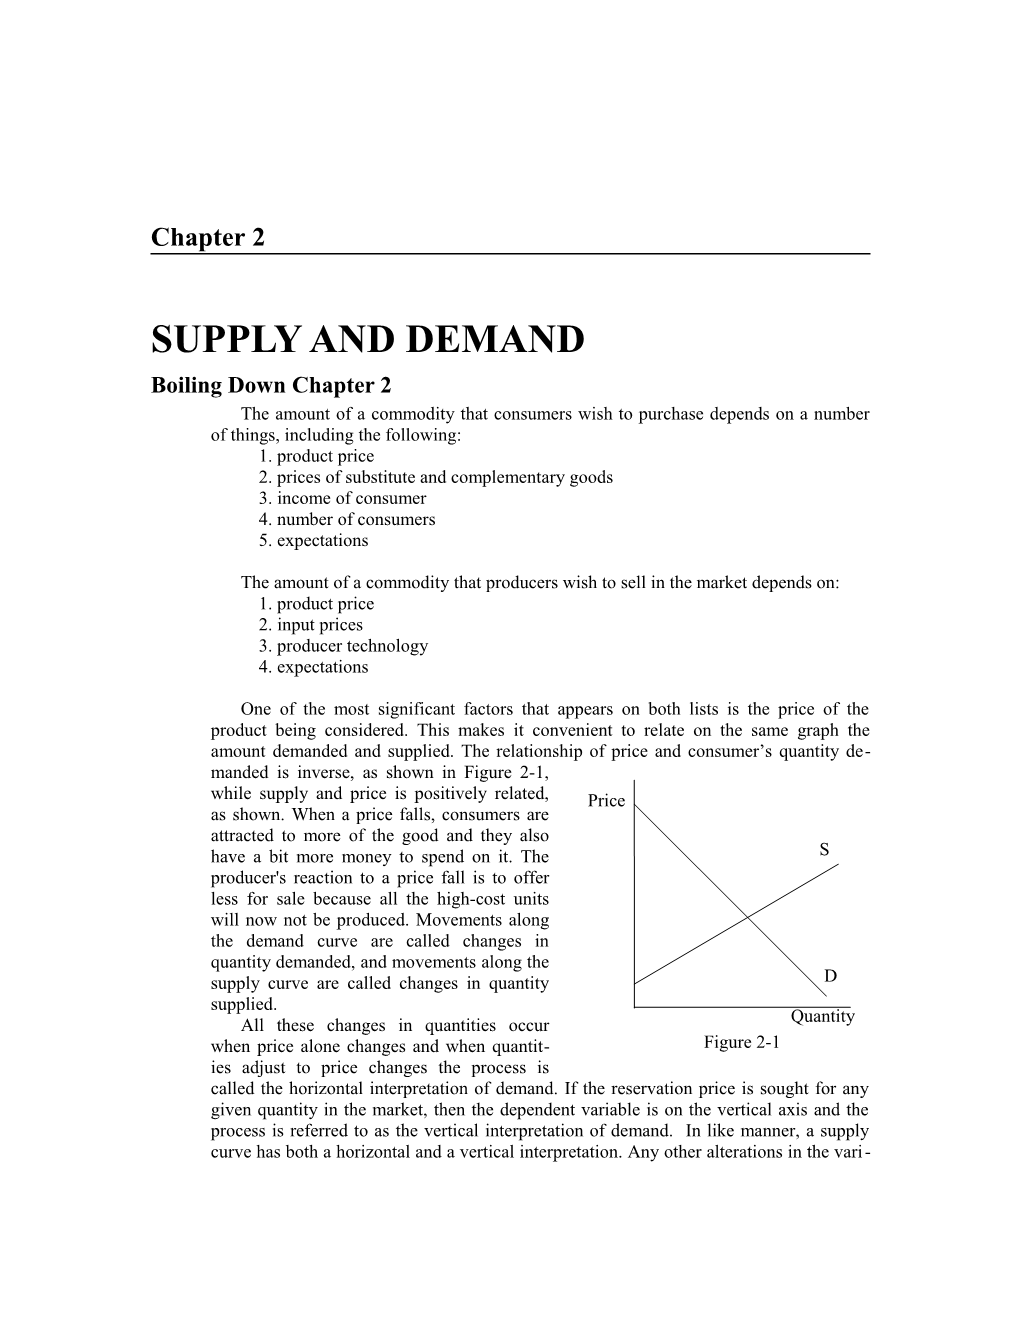 CHAPTER 2: Supply and Demand